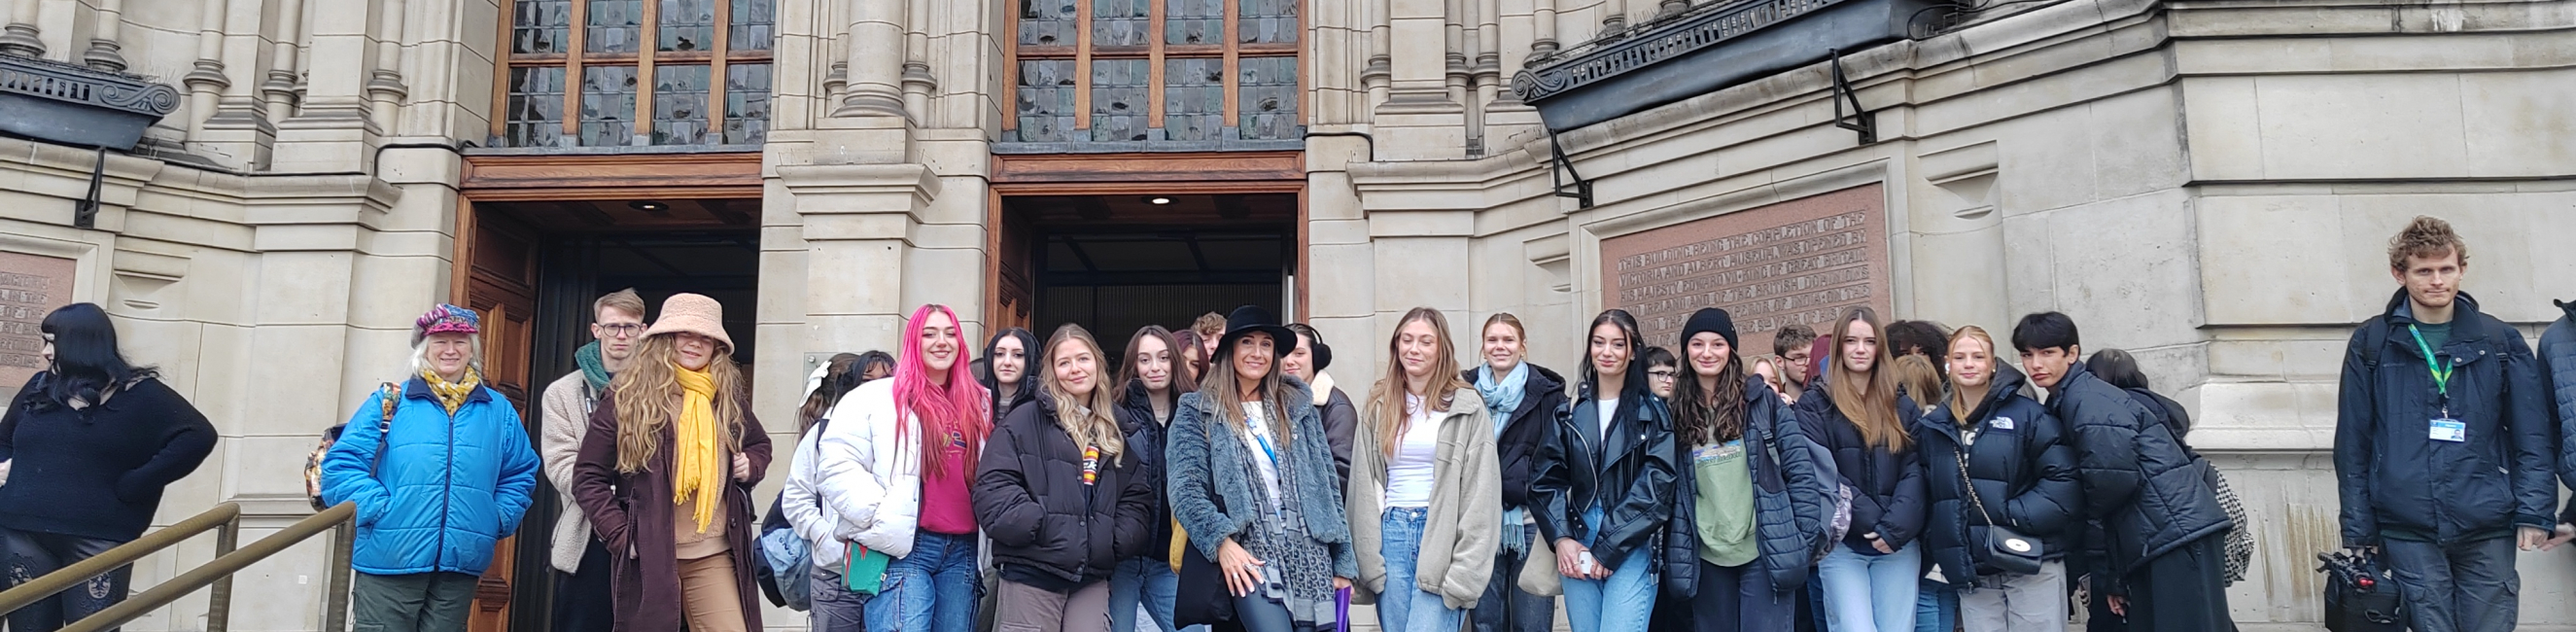 Learners stood outside the Victoria and Albert Museum